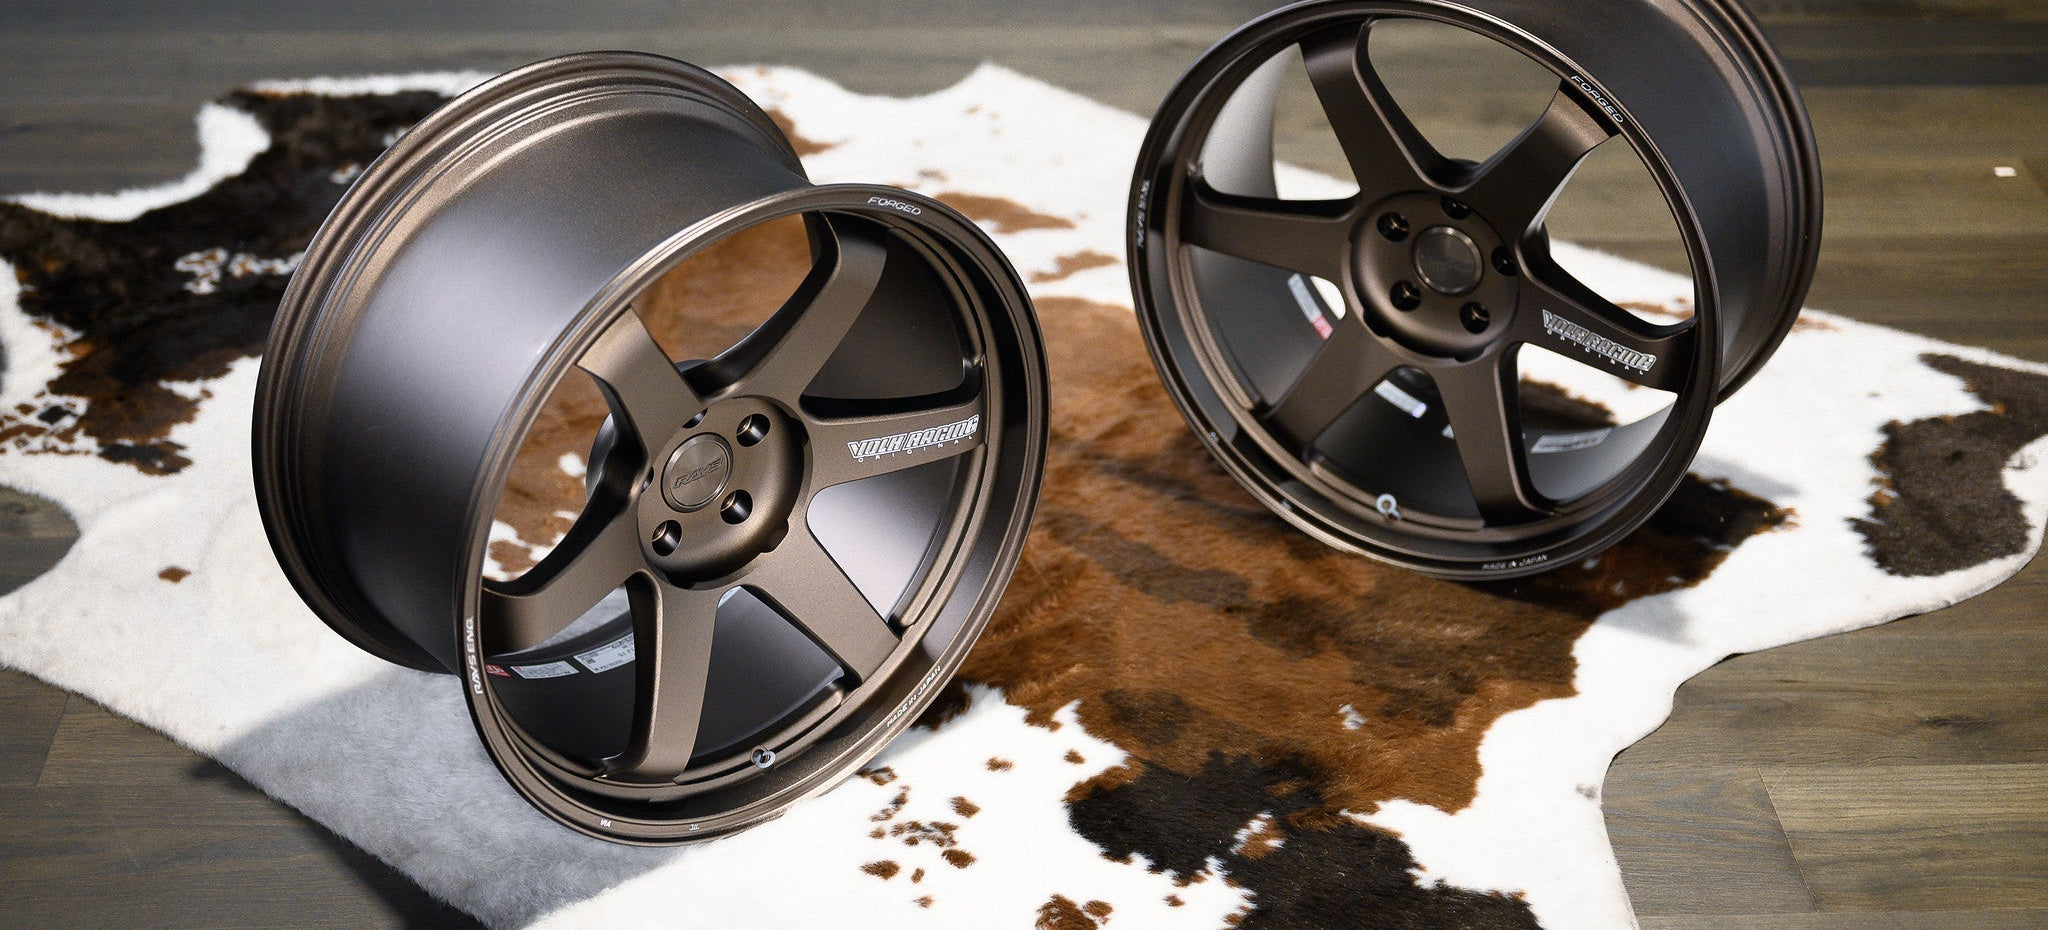 Volk Racing TE37 Ultra M-Spec for F80/82 - Premium Wheels from Volk Racing - From just $4990.00! Shop now at MK MOTORSPORTS